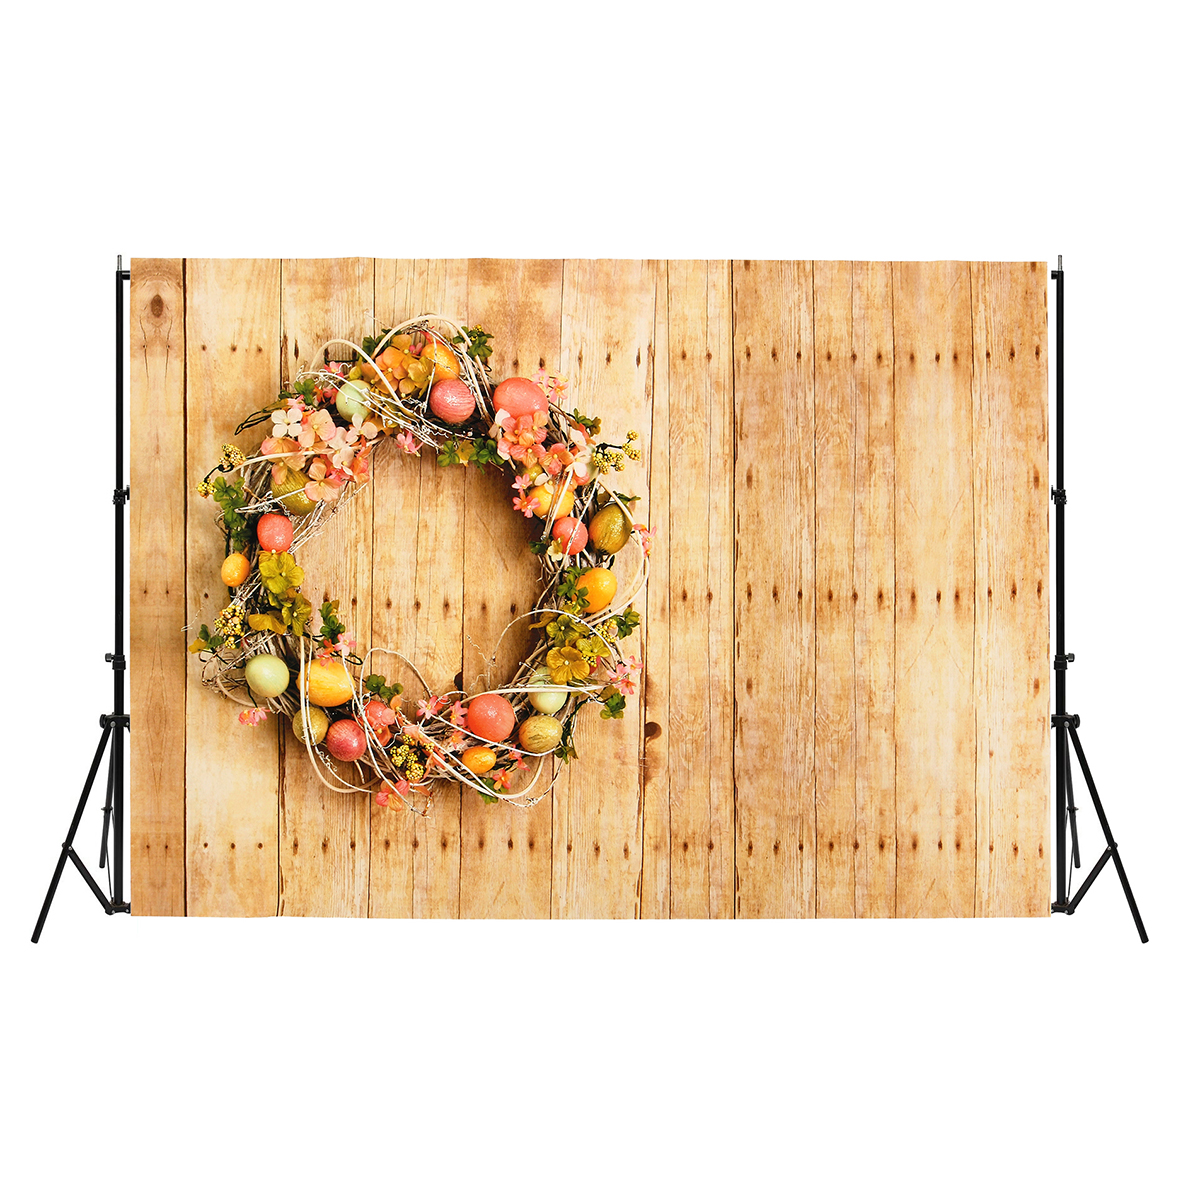 

7x5ft/5x3ft Easter Egg Wood Board Thin Vinyl Photography Backdrop Background Studio Photo Prop